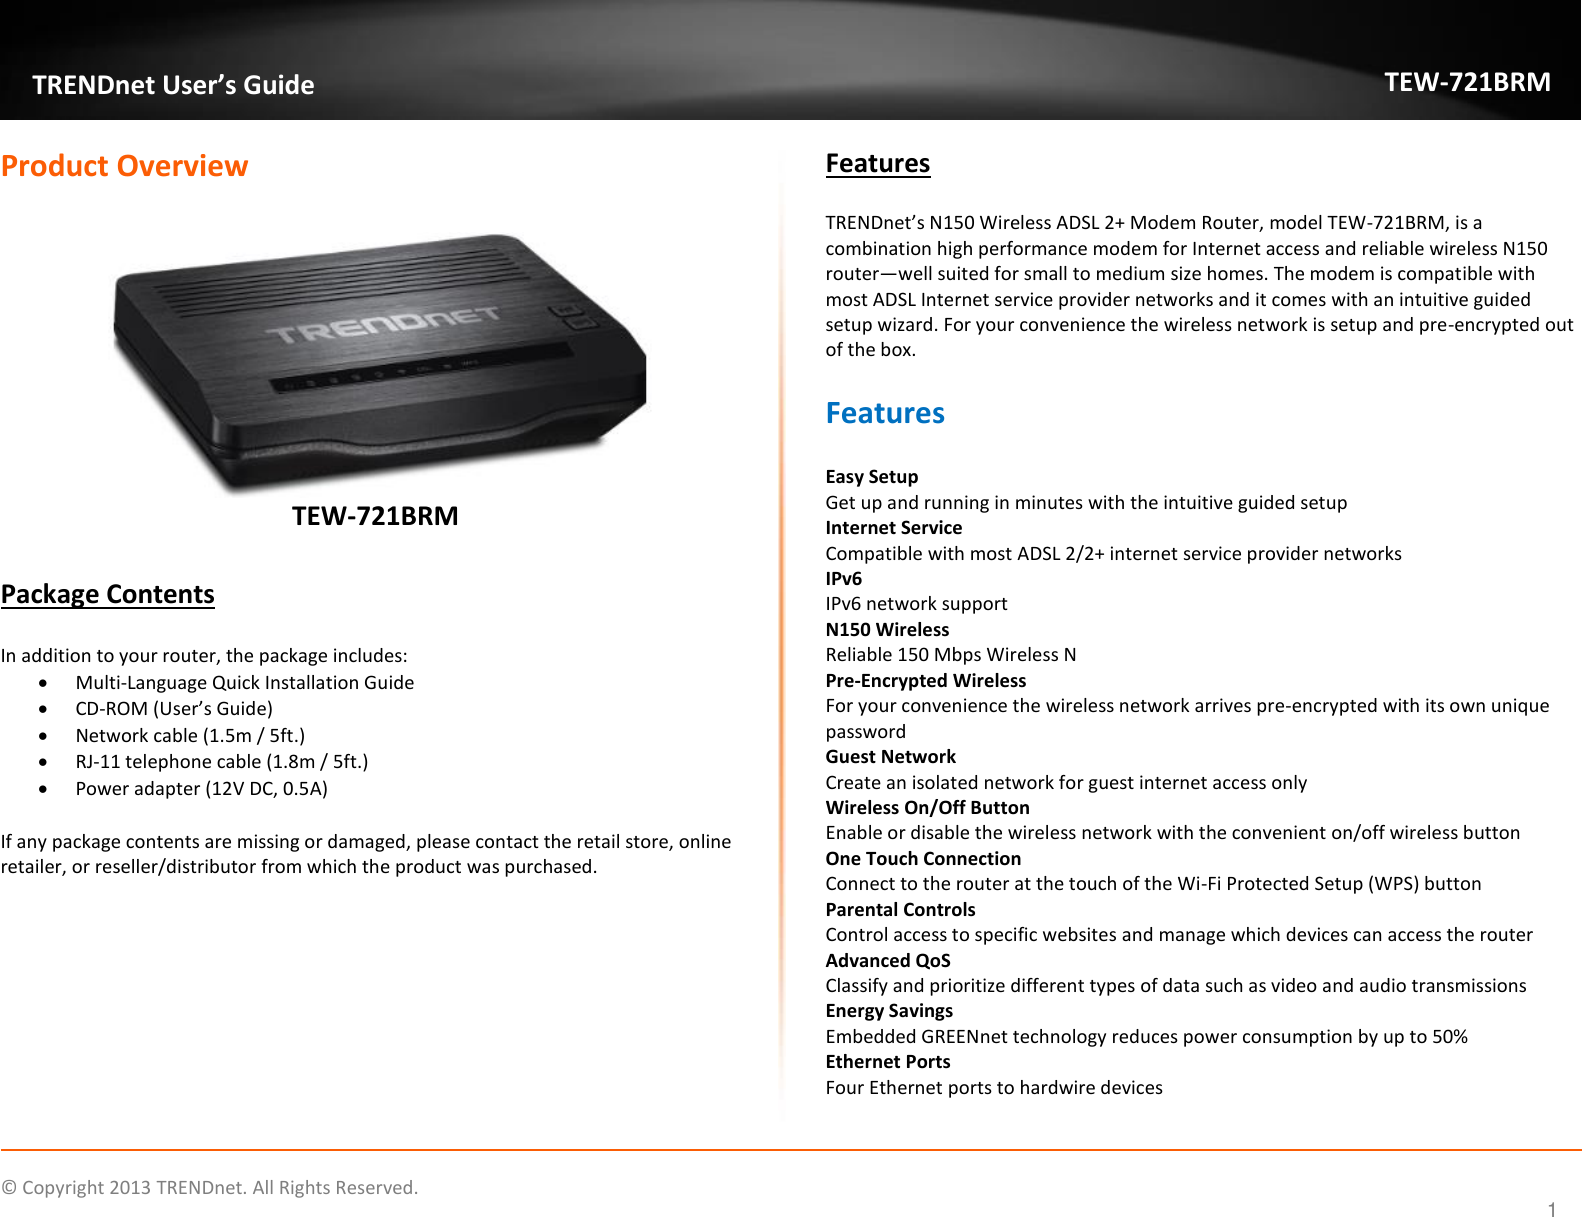             © Copyright 2013 TRENDnet. All Rights Reserved.       TRENDnet User’s Guide TEW-721BRM 1 Product Overview   TEW-721BRM  Package Contents  In addition to your router, the package includes:  Multi-Language Quick Installation Guide  CD-ROM (User’s Guide)  Network cable (1.5m / 5ft.)  RJ-11 telephone cable (1.8m / 5ft.)  Power adapter (12V DC, 0.5A)  If any package contents are missing or damaged, please contact the retail store, online retailer, or reseller/distributor from which the product was purchased. Features TRENDnet’s N150 Wireless ADSL 2+ Modem Router, model TEW-721BRM, is a combination high performance modem for Internet access and reliable wireless N150 router—well suited for small to medium size homes. The modem is compatible with most ADSL Internet service provider networks and it comes with an intuitive guided setup wizard. For your convenience the wireless network is setup and pre-encrypted out of the box. Features  Easy Setup Get up and running in minutes with the intuitive guided setup Internet Service  Compatible with most ADSL 2/2+ internet service provider networks  IPv6 IPv6 network support N150 Wireless Reliable 150 Mbps Wireless N Pre-Encrypted Wireless  For your convenience the wireless network arrives pre-encrypted with its own unique password Guest Network Create an isolated network for guest internet access only Wireless On/Off Button Enable or disable the wireless network with the convenient on/off wireless button  One Touch Connection Connect to the router at the touch of the Wi-Fi Protected Setup (WPS) button Parental Controls Control access to specific websites and manage which devices can access the router Advanced QoS Classify and prioritize different types of data such as video and audio transmissions Energy Savings Embedded GREENnet technology reduces power consumption by up to 50% Ethernet Ports  Four Ethernet ports to hardwire devices   